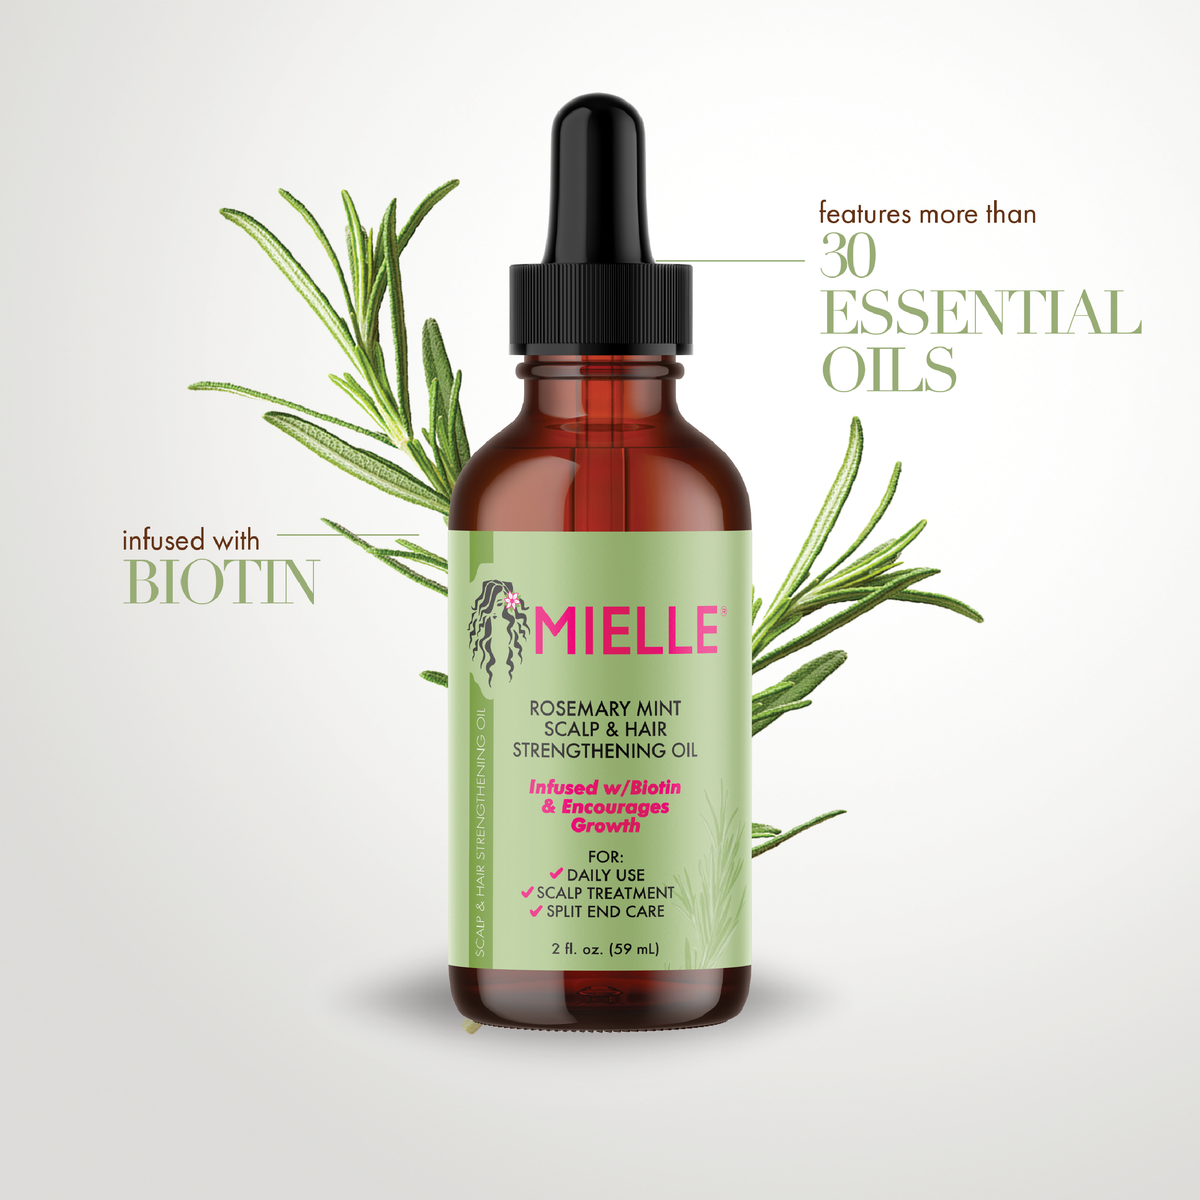 Mielle Rosemary Mint Scalp And Hair Strengthening Oil Skin Store Pakistan 5442